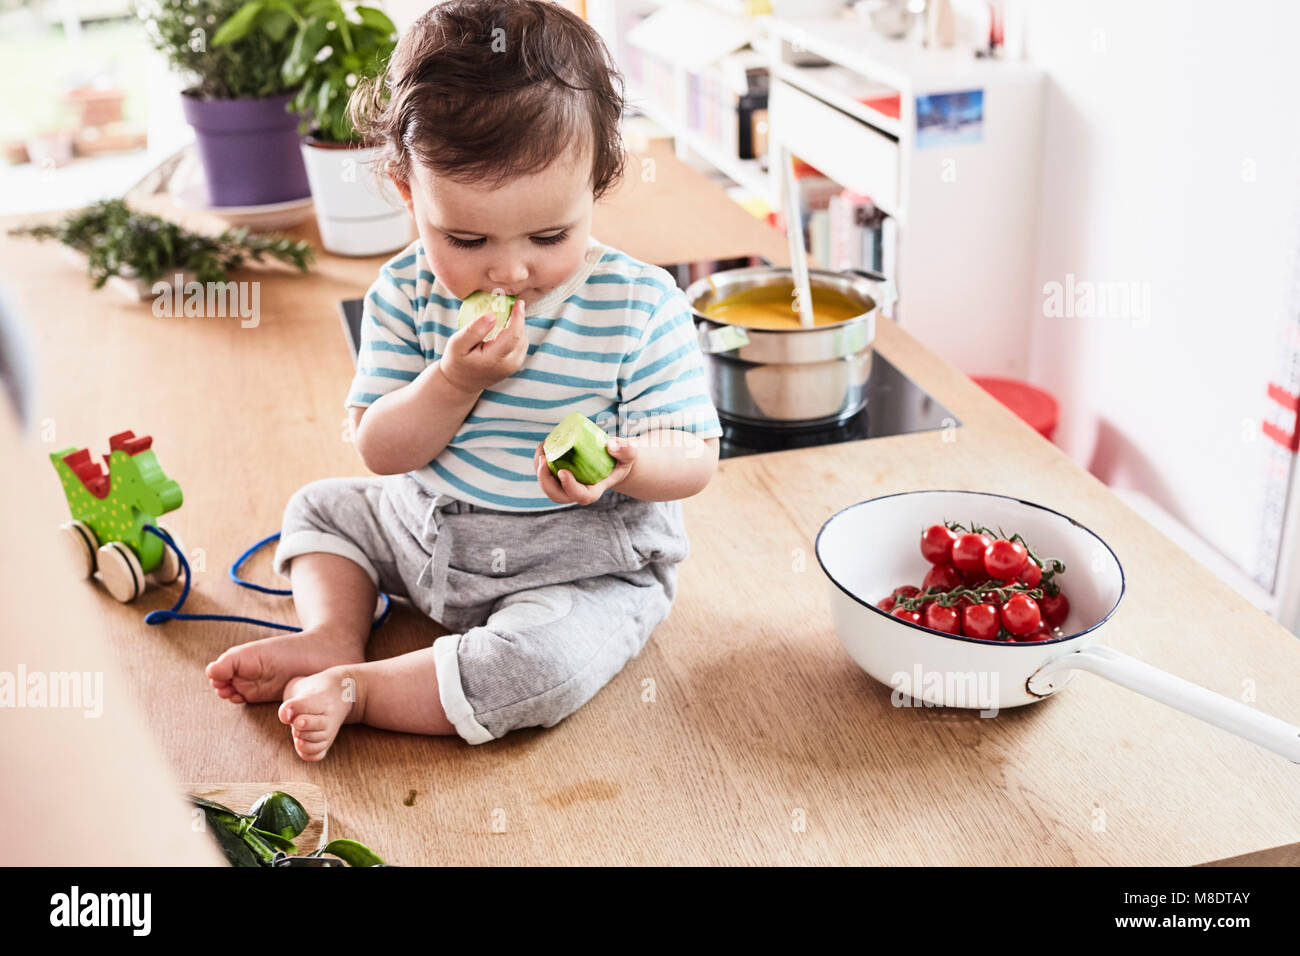 Baby girl sitting on kitchen counter, eating cucumber Stock Photo